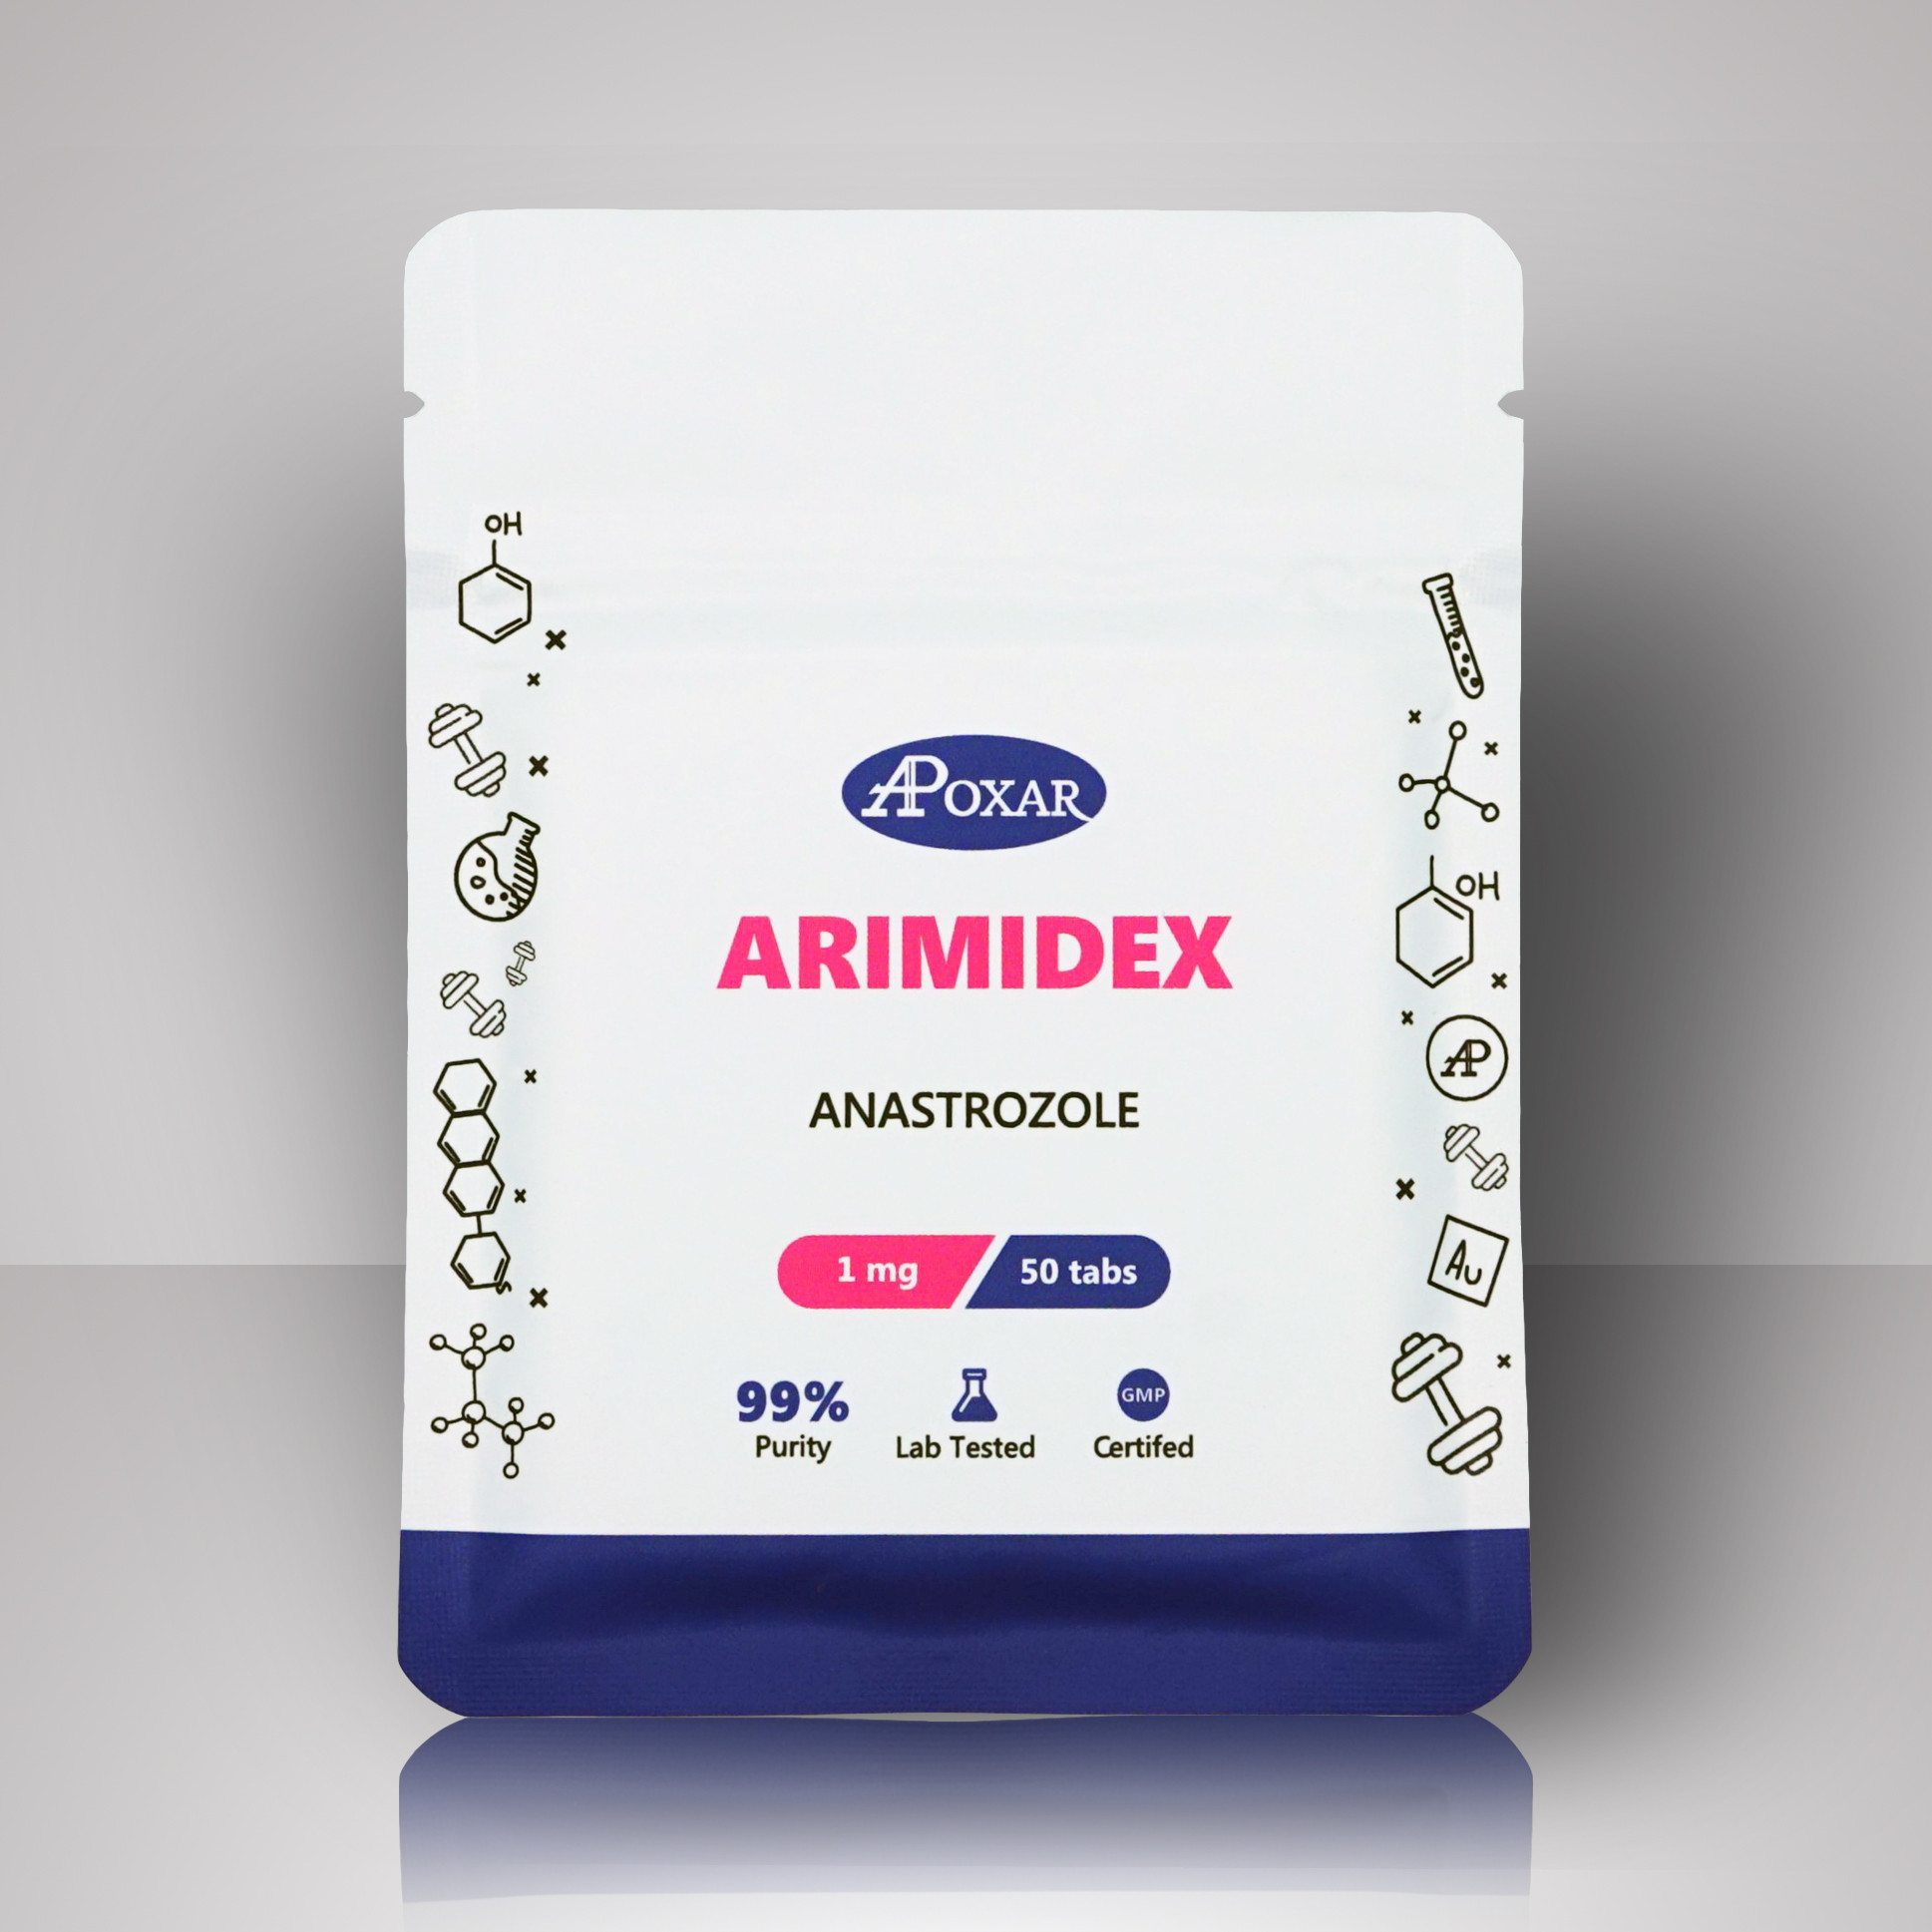 buy-apoxar-arimidex-anastrozole-1mg-30tabs-online-for-only-80-00